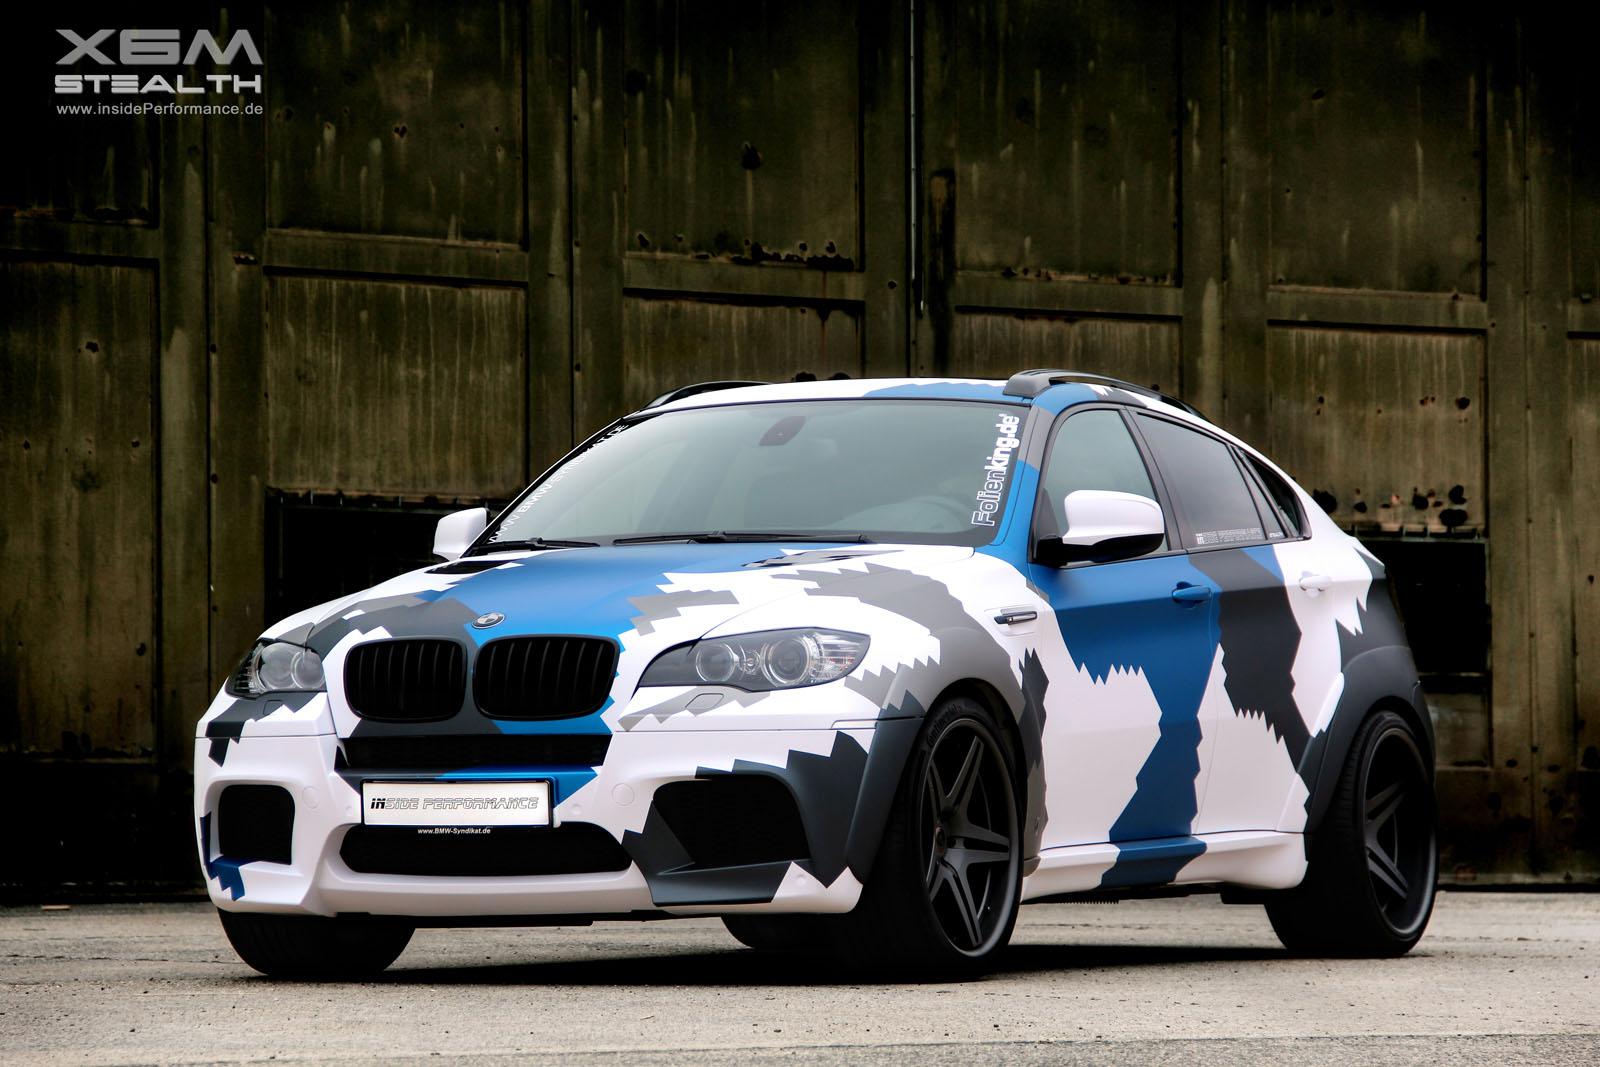 Inside Performance BMW X6 M gets ‘Stealth’ tuning package